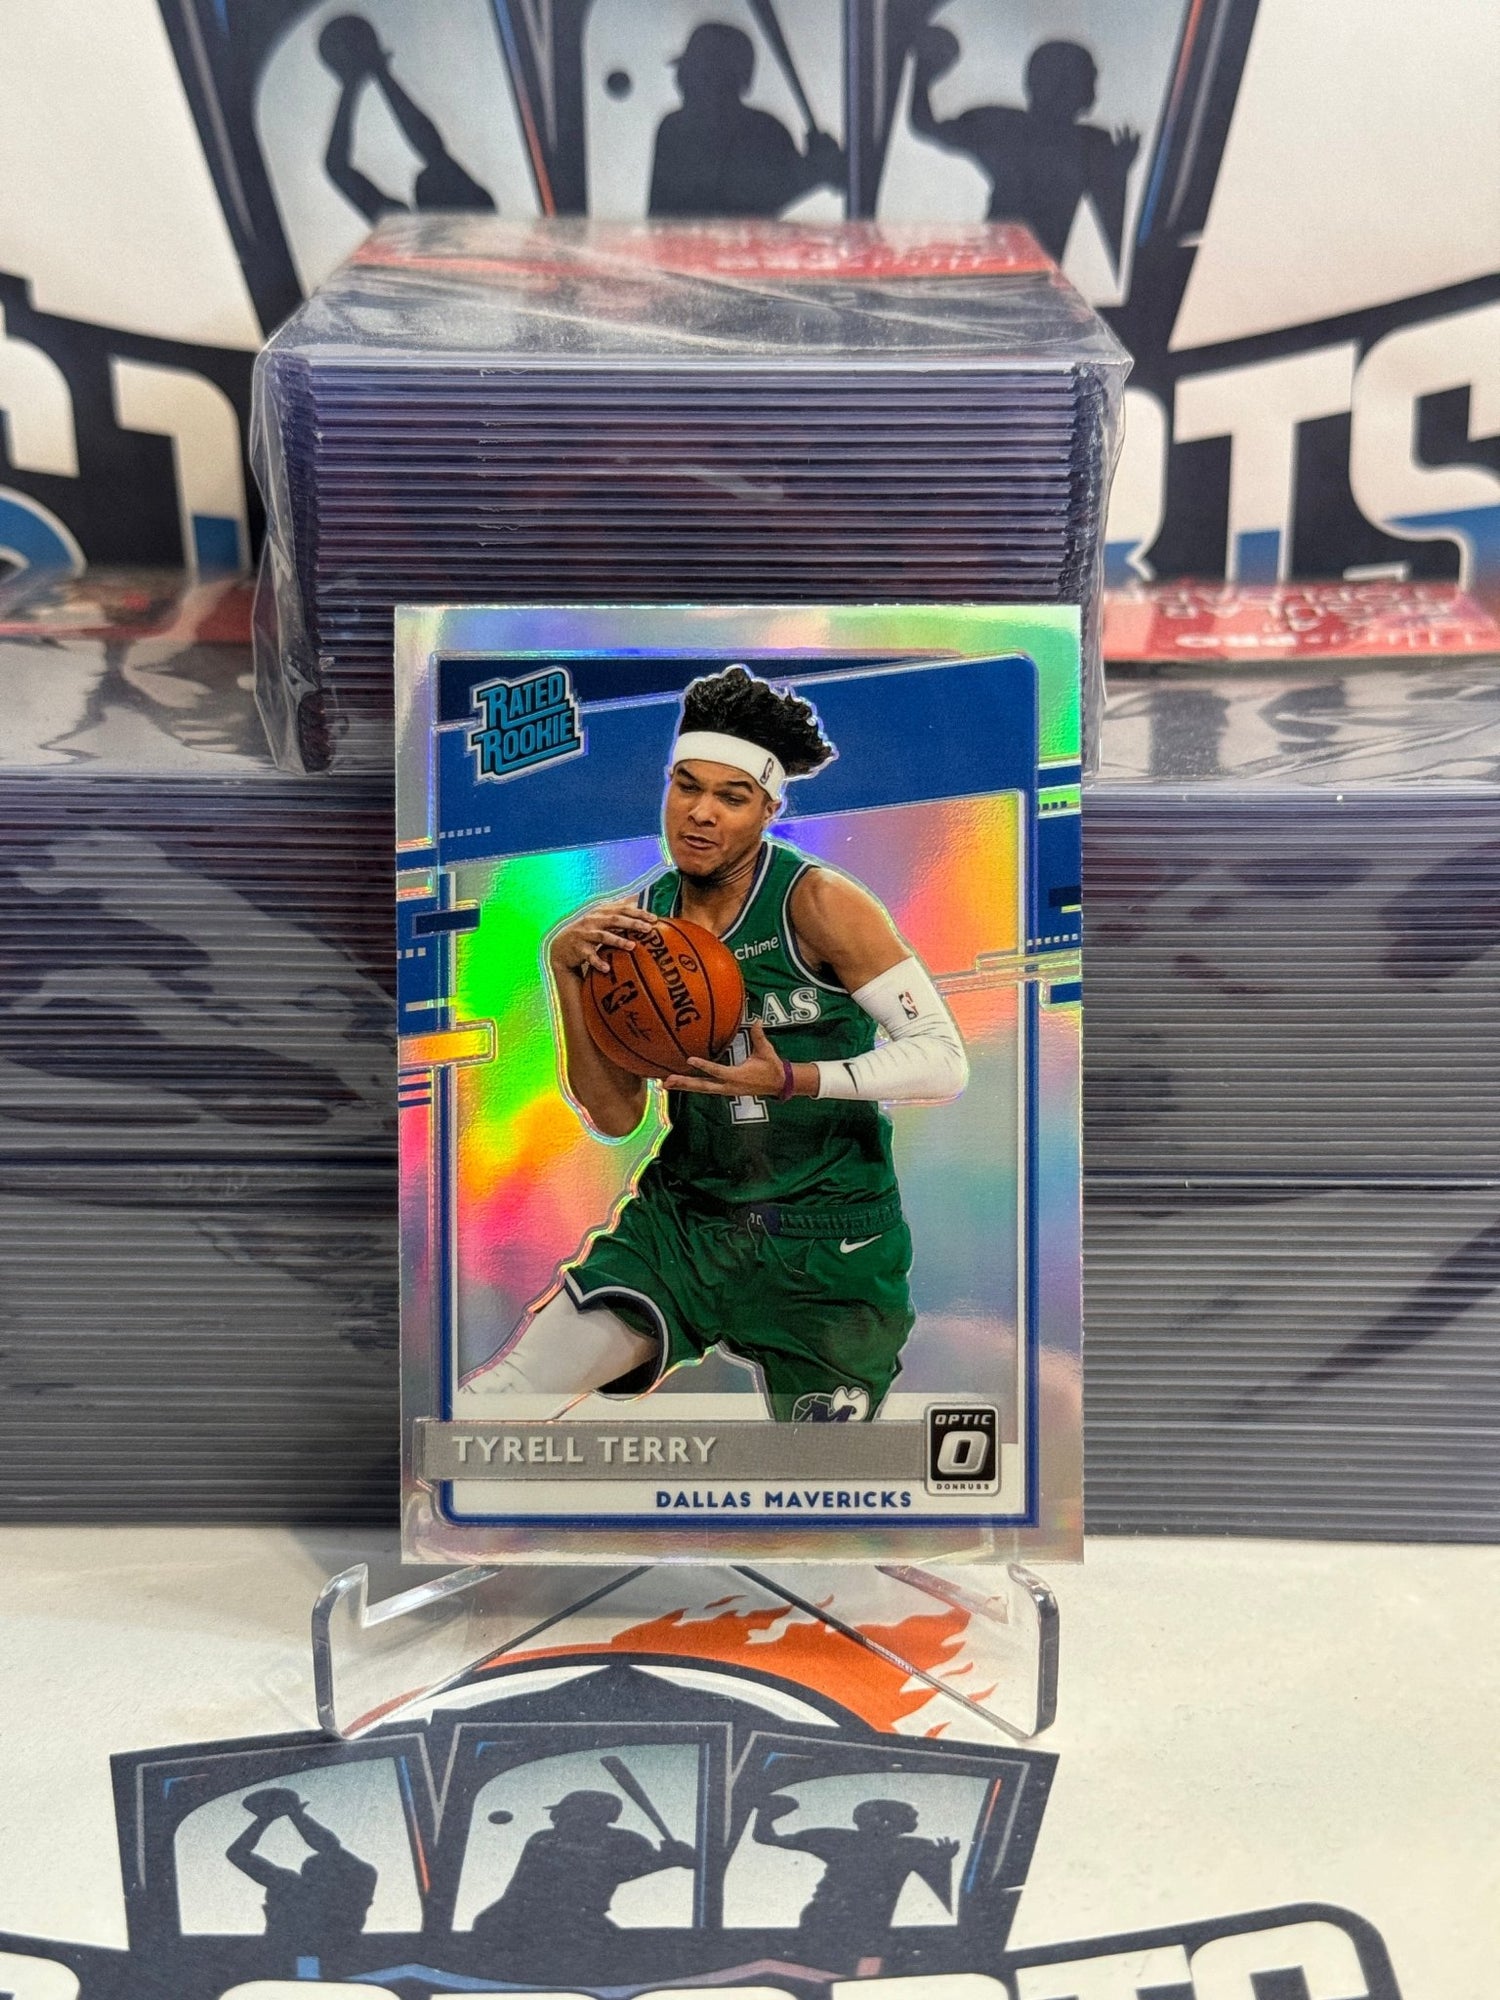 2020 Donruss Optic (Holo Prizm, Rated Rookie) Terrell Terry #181